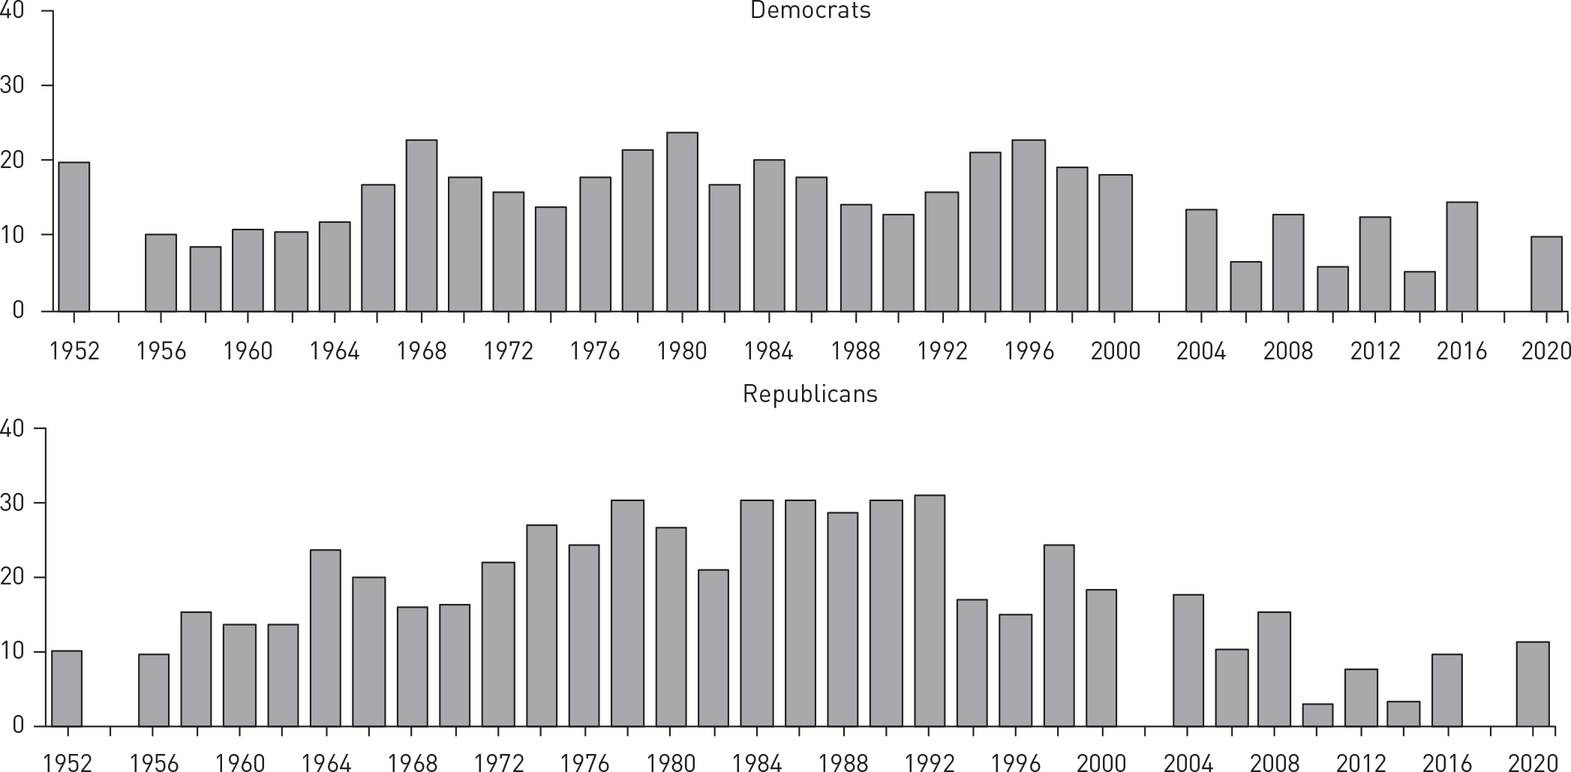 Two bar graphs of the defection rates by party identifiers in congressional voting between 1952 and 1920.